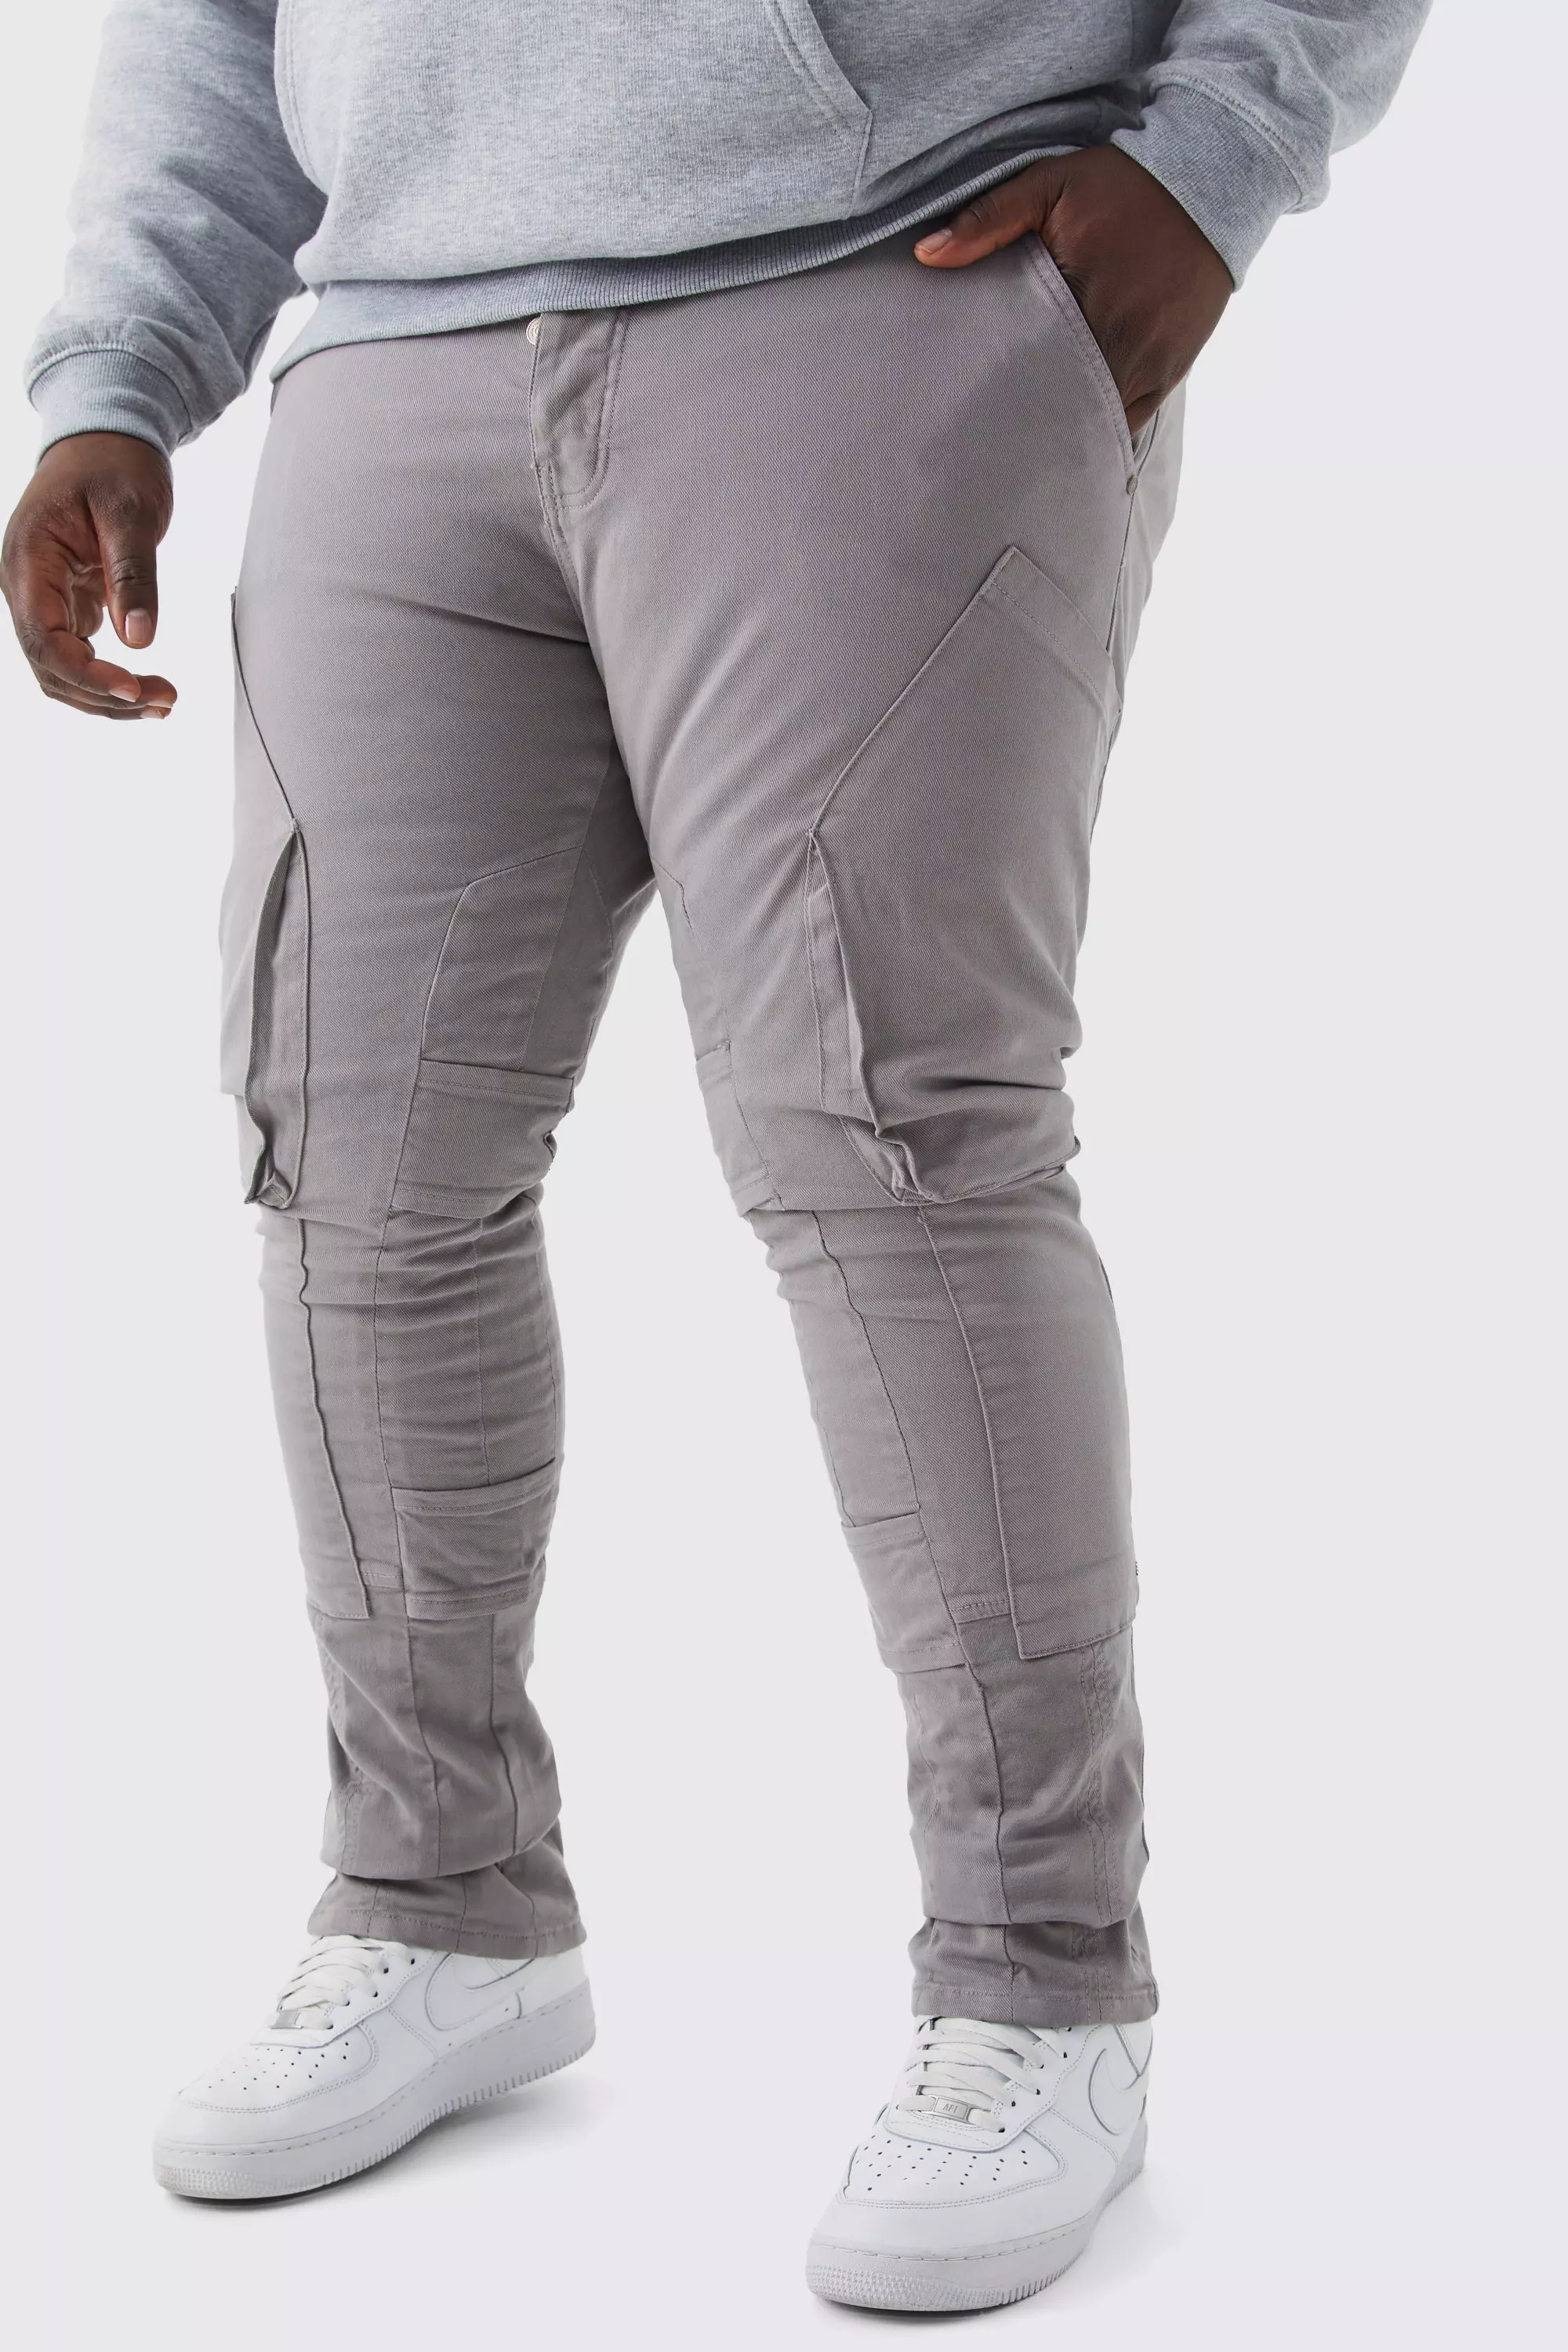 Grey Plus Fixed Waist Skinny Stacked Gusset Strap Cargo Pants